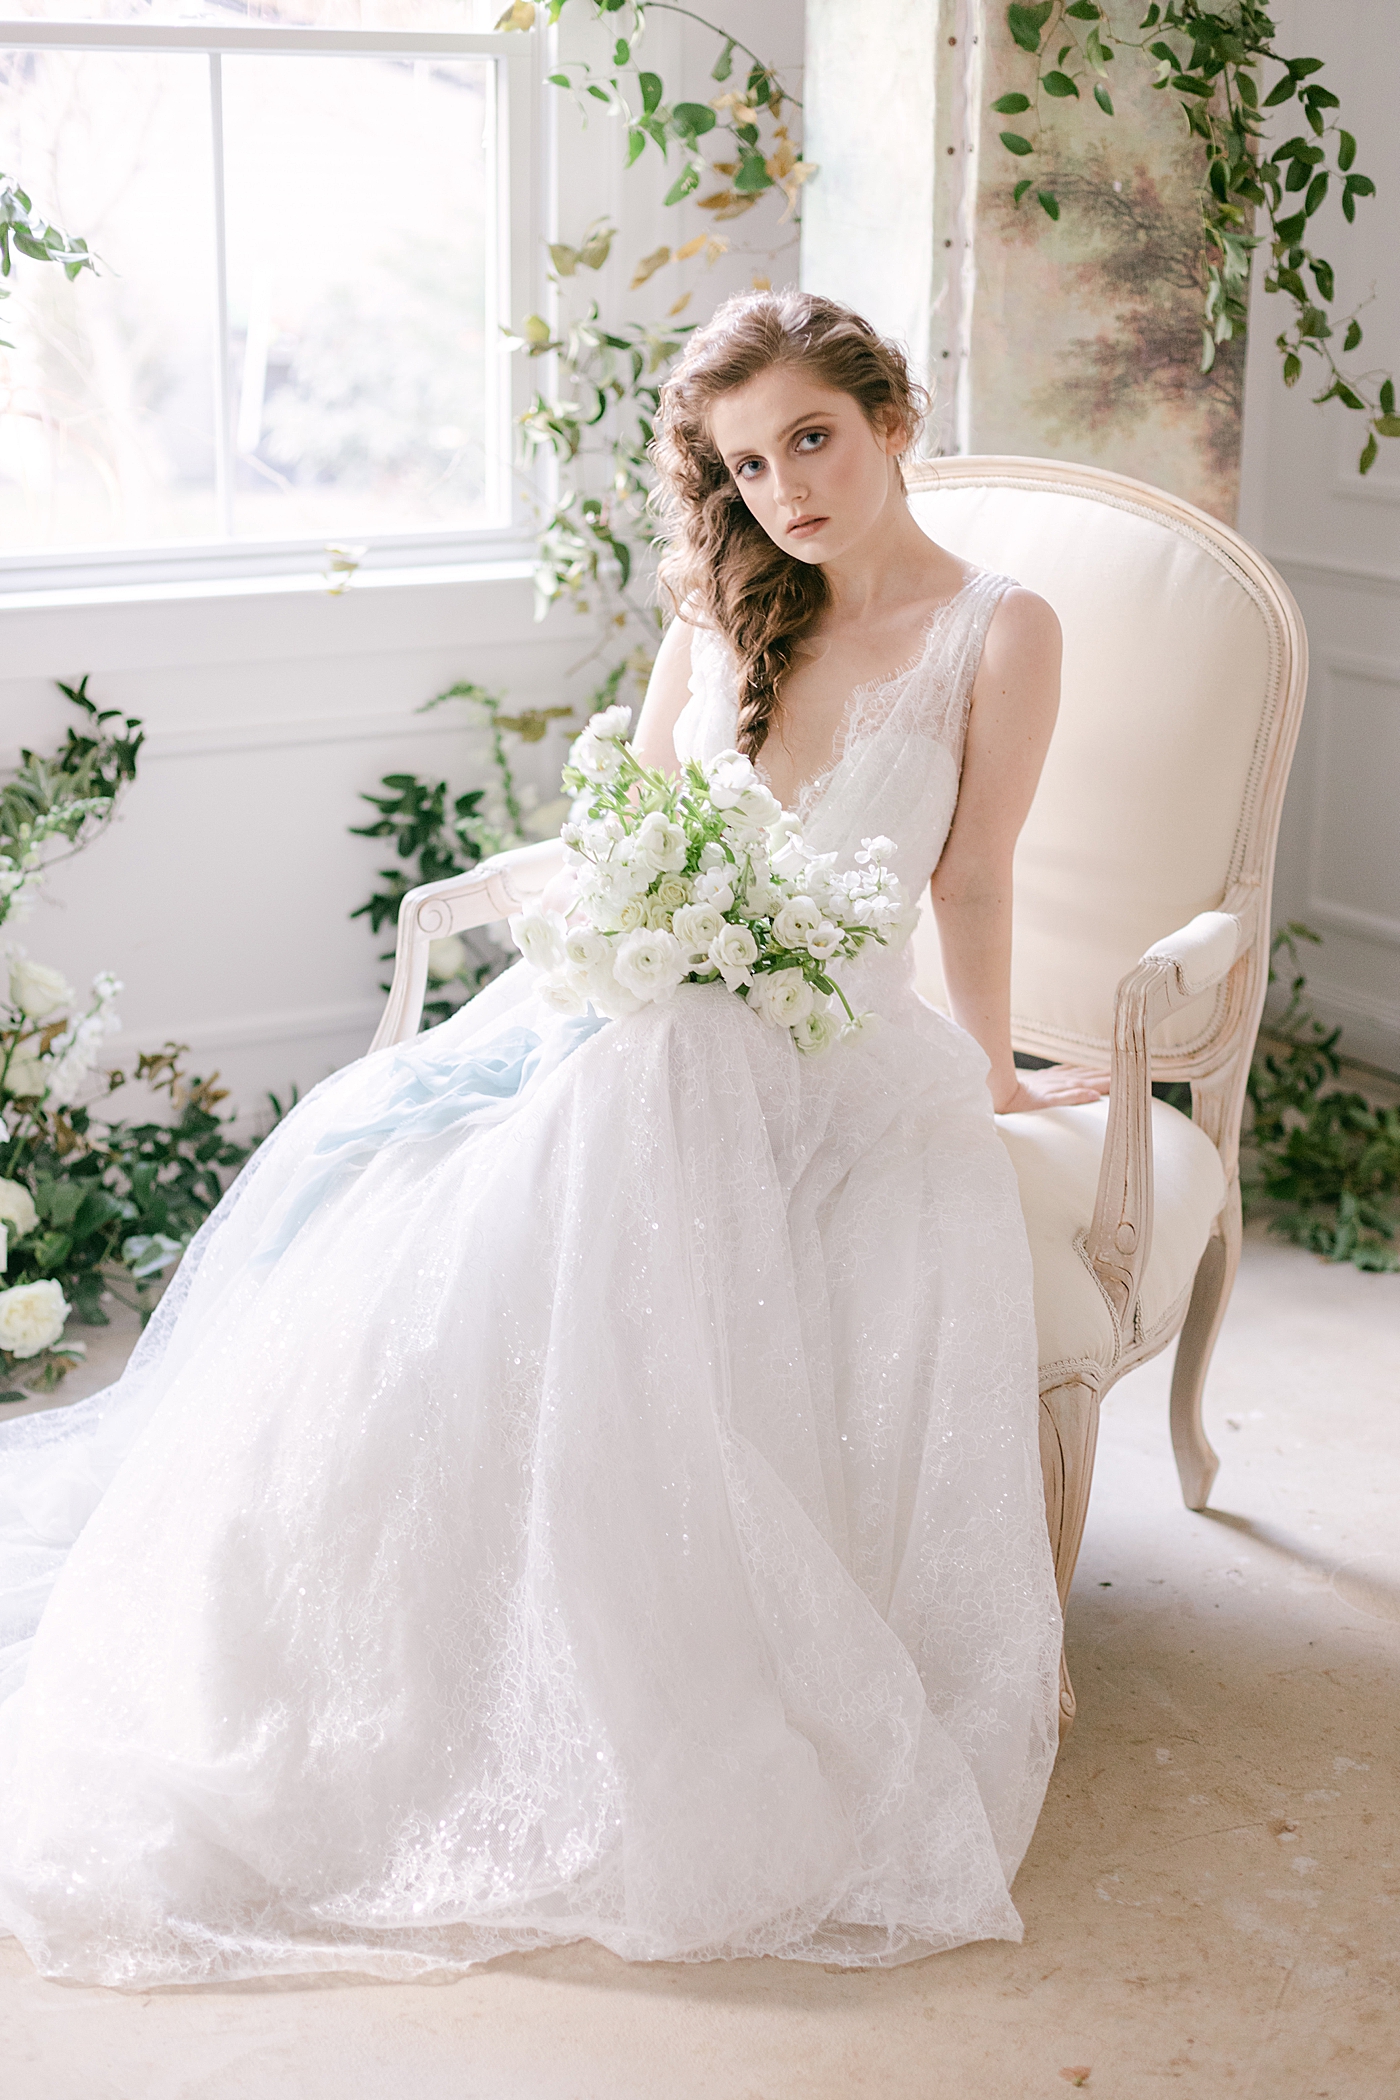 Bride in white gown sitting in a chair | Photo by Hope Helmuth Photograpghy